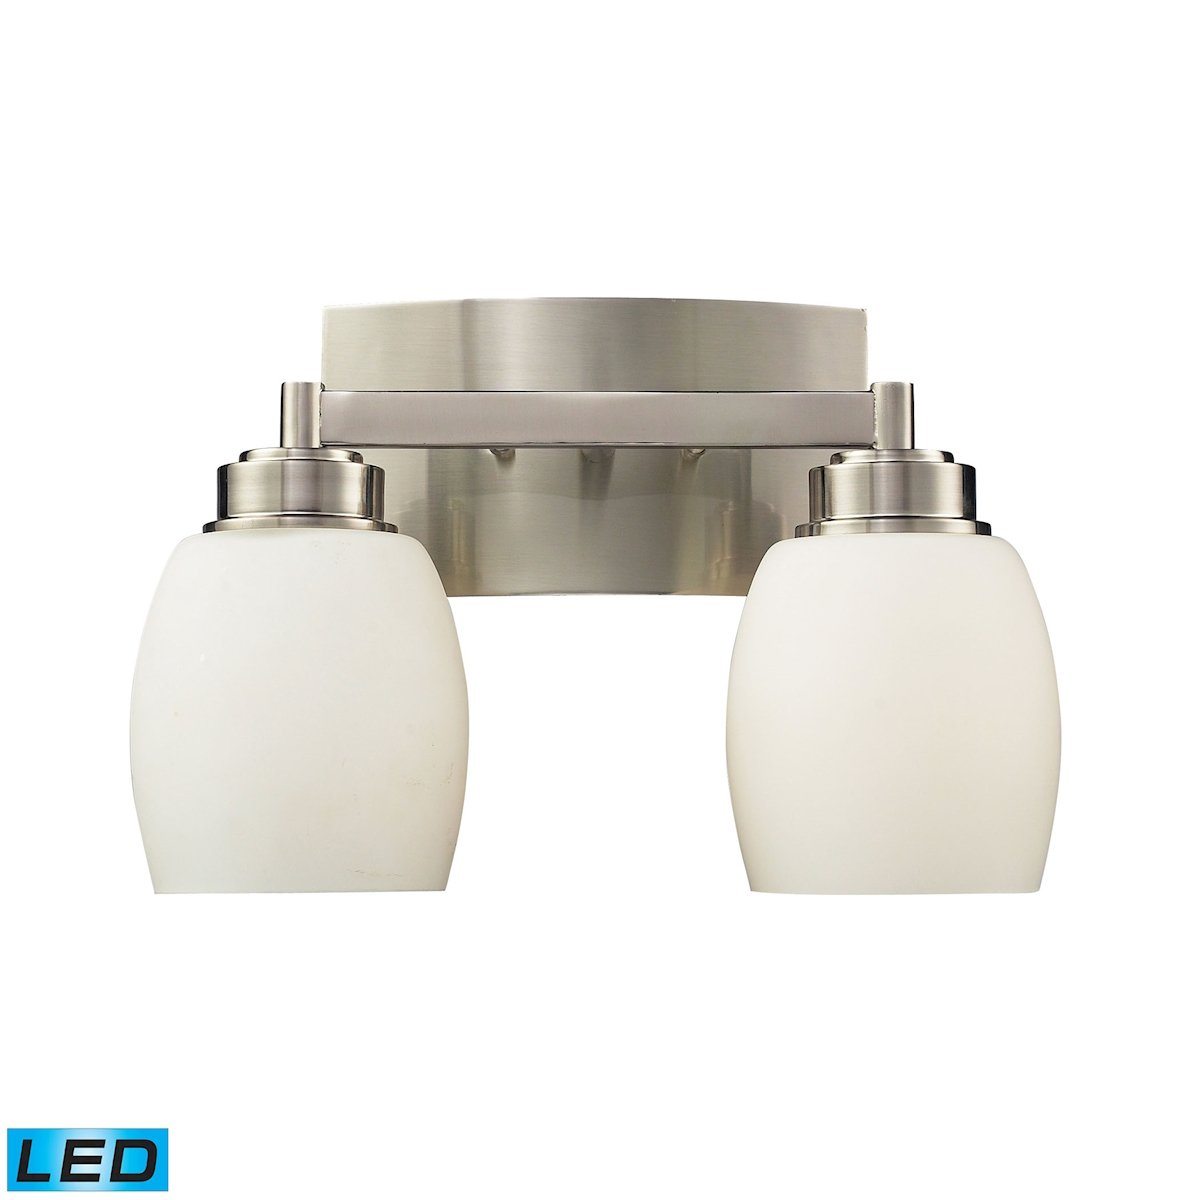 Northport 2 Light LED Vanity In Satin Nickel And Opal White Glass Wall Elk Lighting 